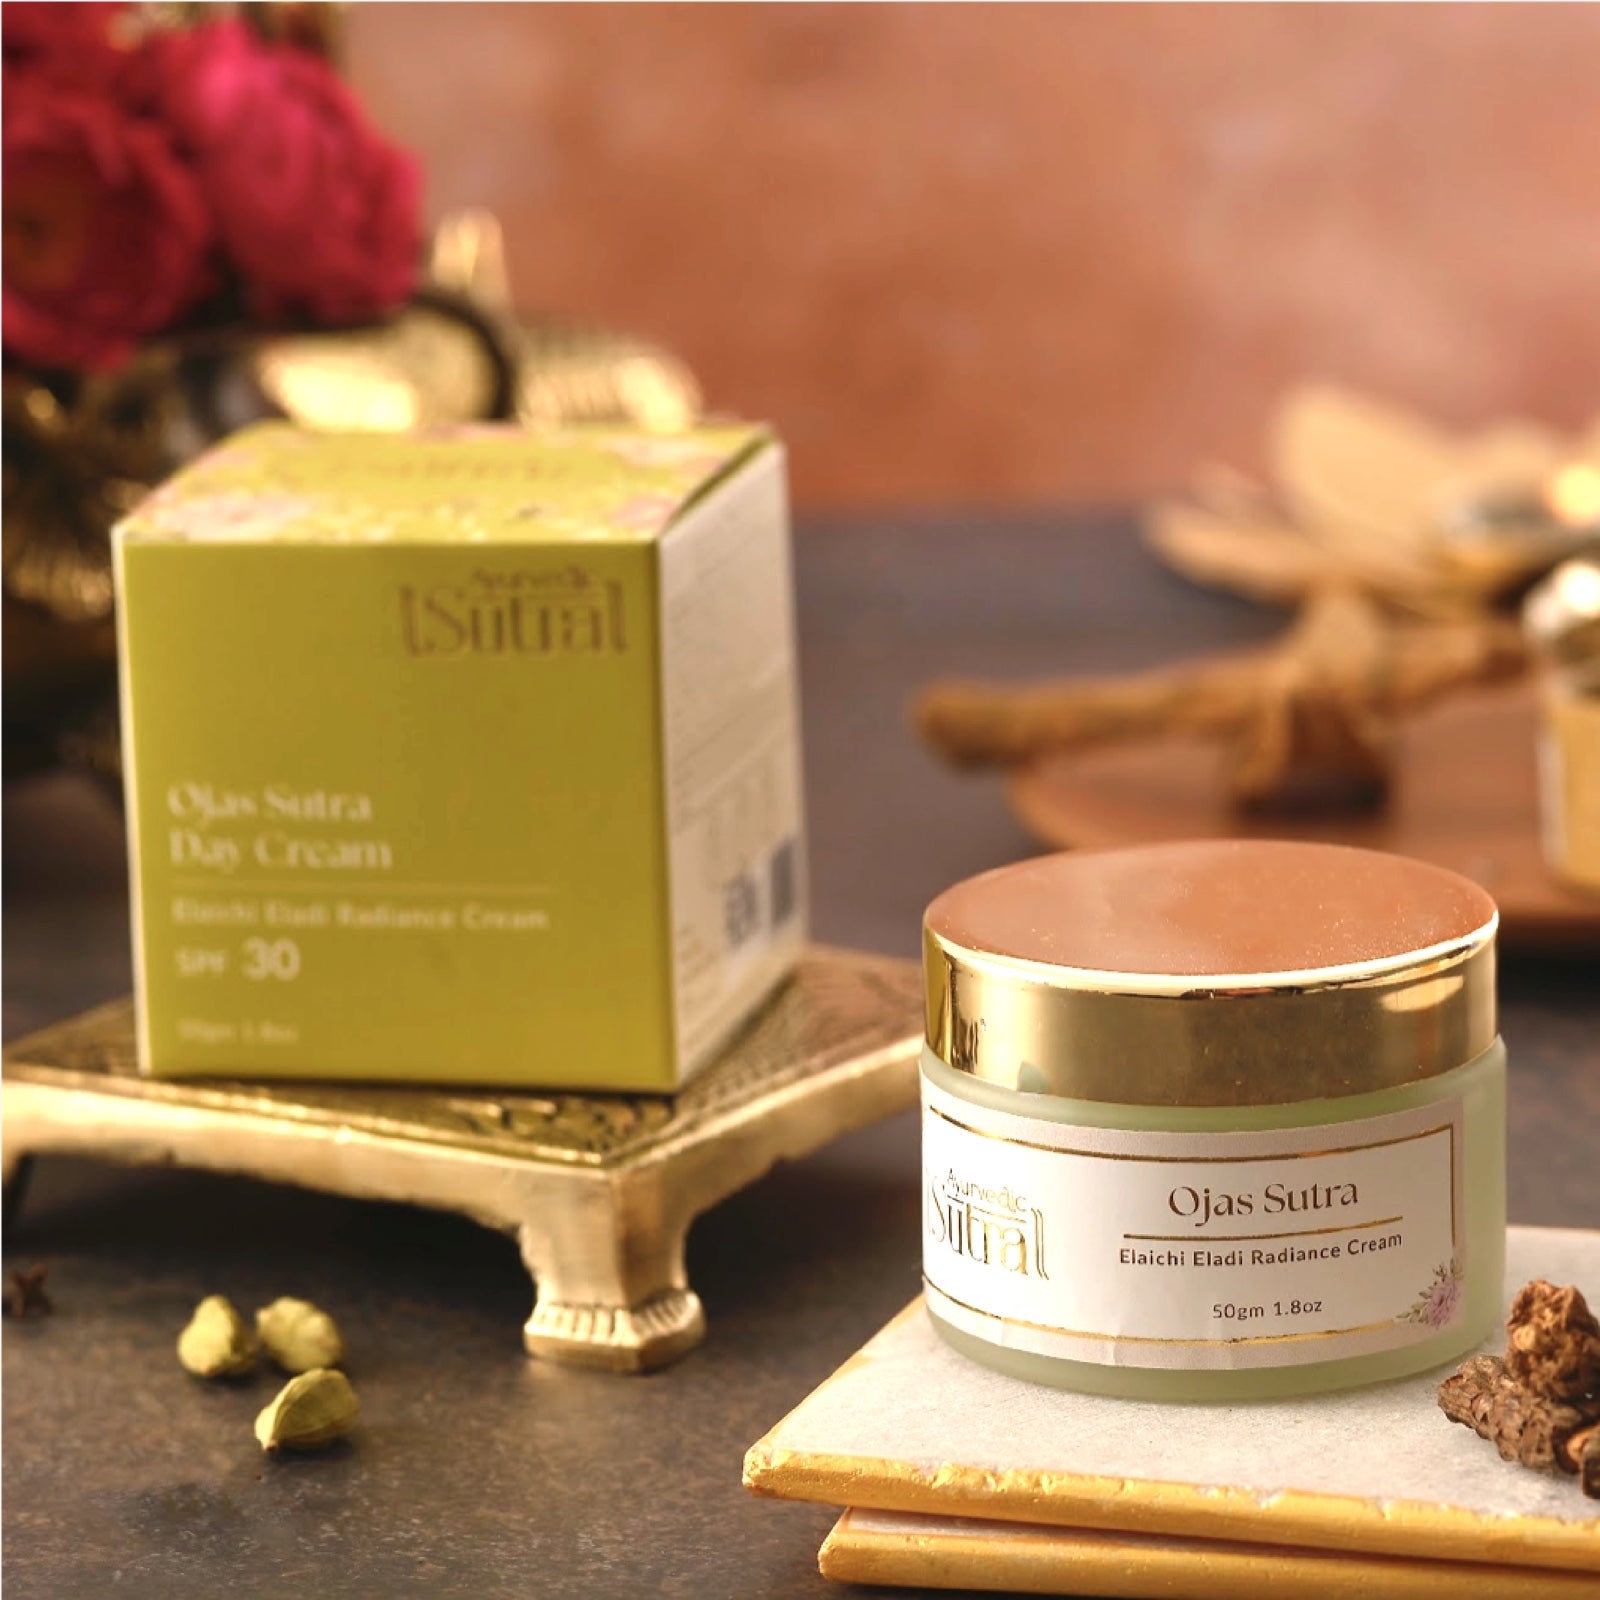 Ayurvedic Face Creams & Moisturizers for Healthy, Radiant Skin